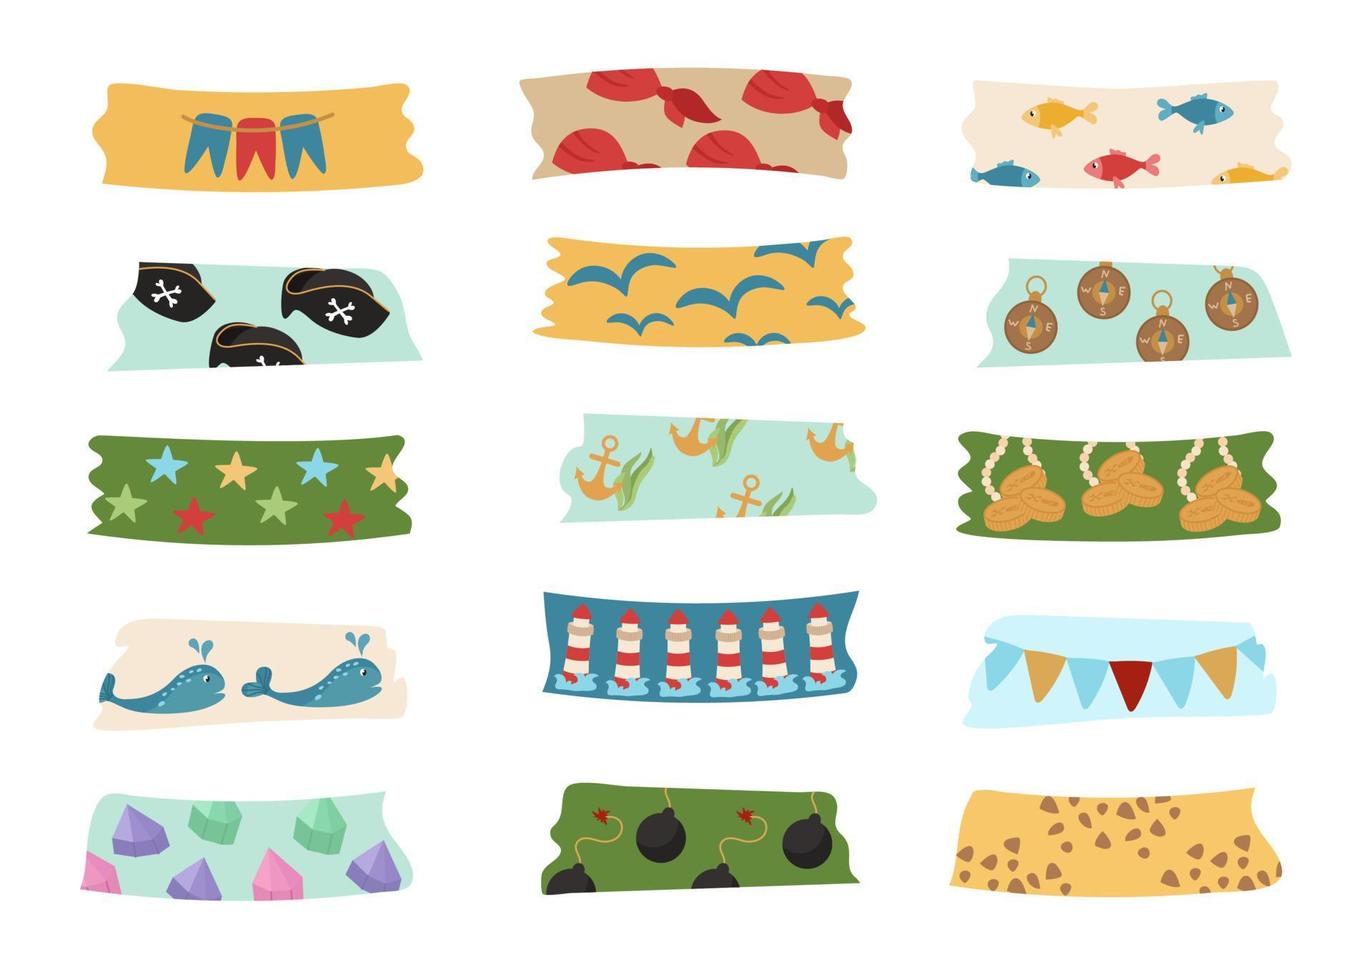 Washi tapes is a pirate collection with three-cornered treasures, fish, bombs, lighthouses. For notes, organizer, planner, scrapbooking. Vector illustration of adventures in cartoon style